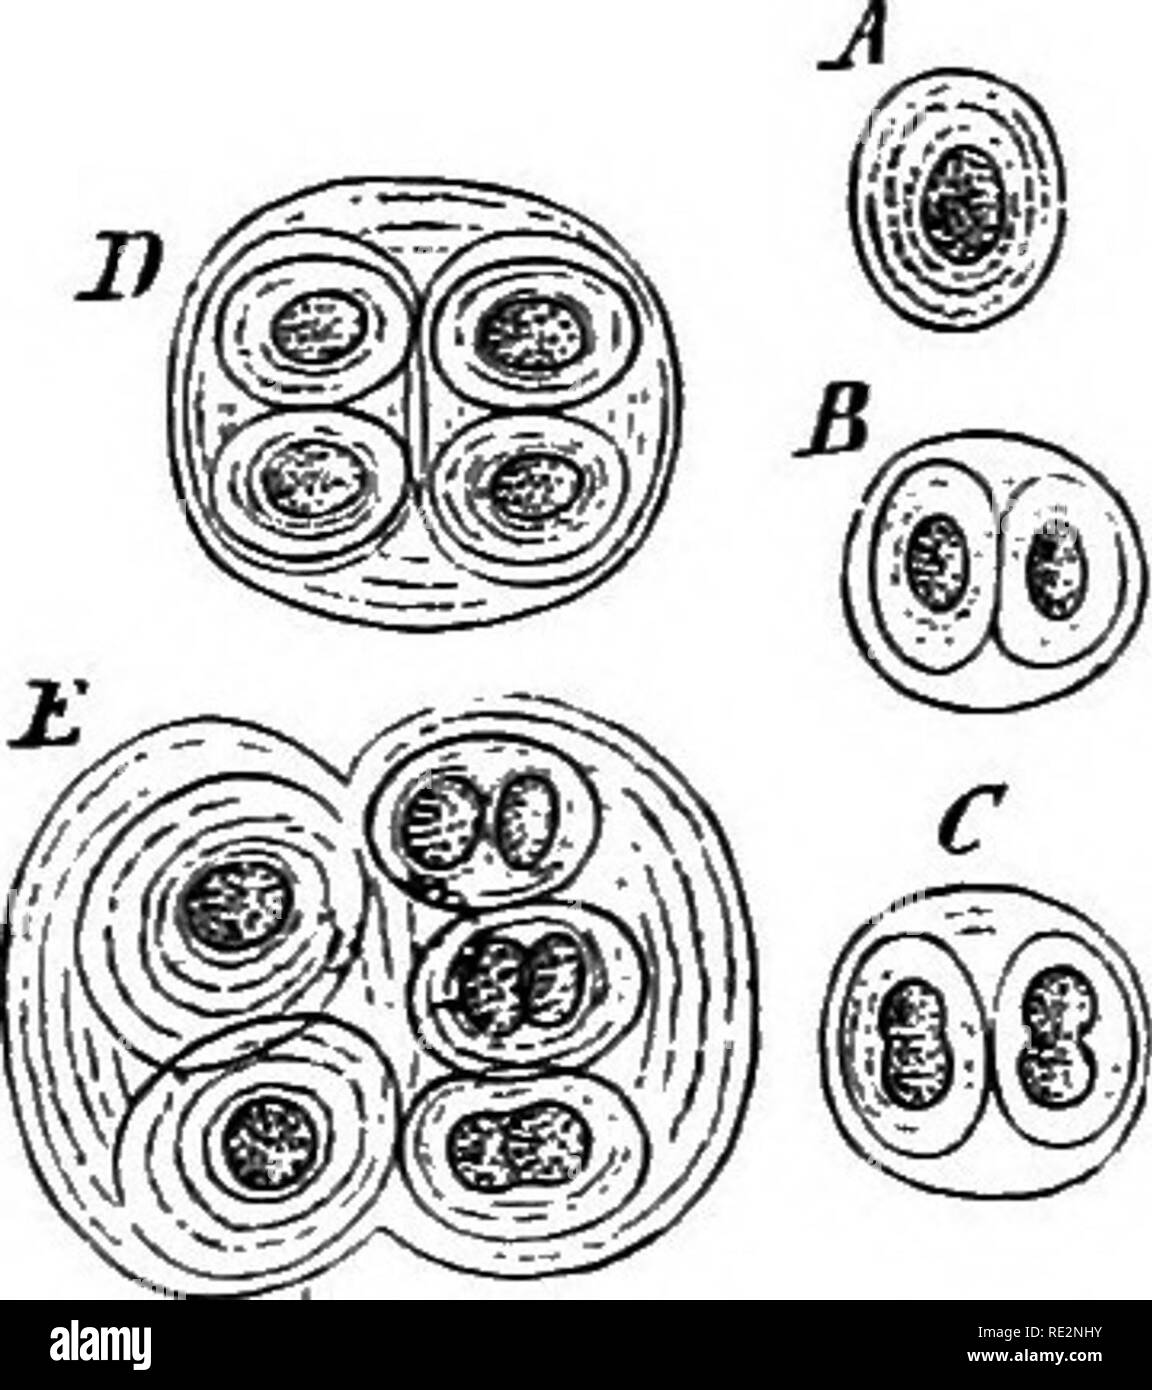 . A handbook of cryptogamic botany. Cryptogams. 446 PROTOPHYTA organism with blue-green endochrome which he regards as the swarm- cell condition of a phycochromaceous alga which occurs normally in a filamentous form, probably as Oscillaria tenuis (Ag.) or O. Frolichii (Ktz.). Literature. Fresenius—Ueb. d. Bau u. d. Leben d. Oscillarieen, 1845. Braun—Bot. Zeit., 1852, p. 395. Bornet and Thuret—Notes Algol., fasc. I, pp. iii.-iv. ; and fasc. 2, pp. 132-135. Zukal—Oesterr. Bot. Zeitschr., 1880, p. 11. Hansgirg—Oesterr. Bot. Zeitschr., 1884, pp. 313 et seq. ; and Ber. Deutsch. Bot. Gesell., 1885,  Stock Photo